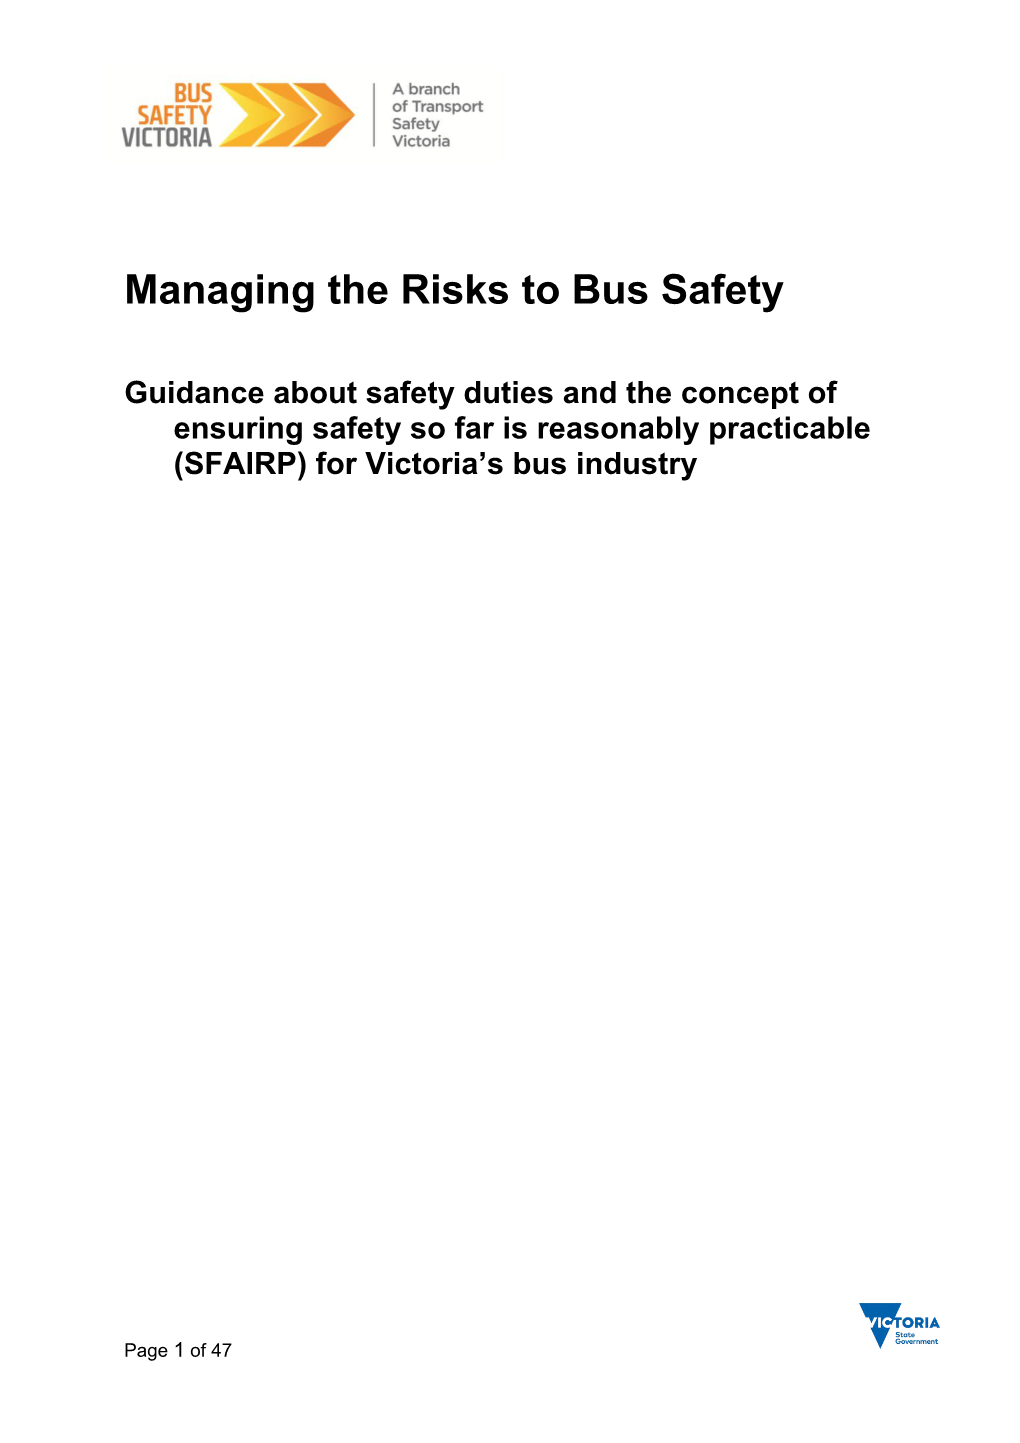 Managing the Risks to Bus Safety